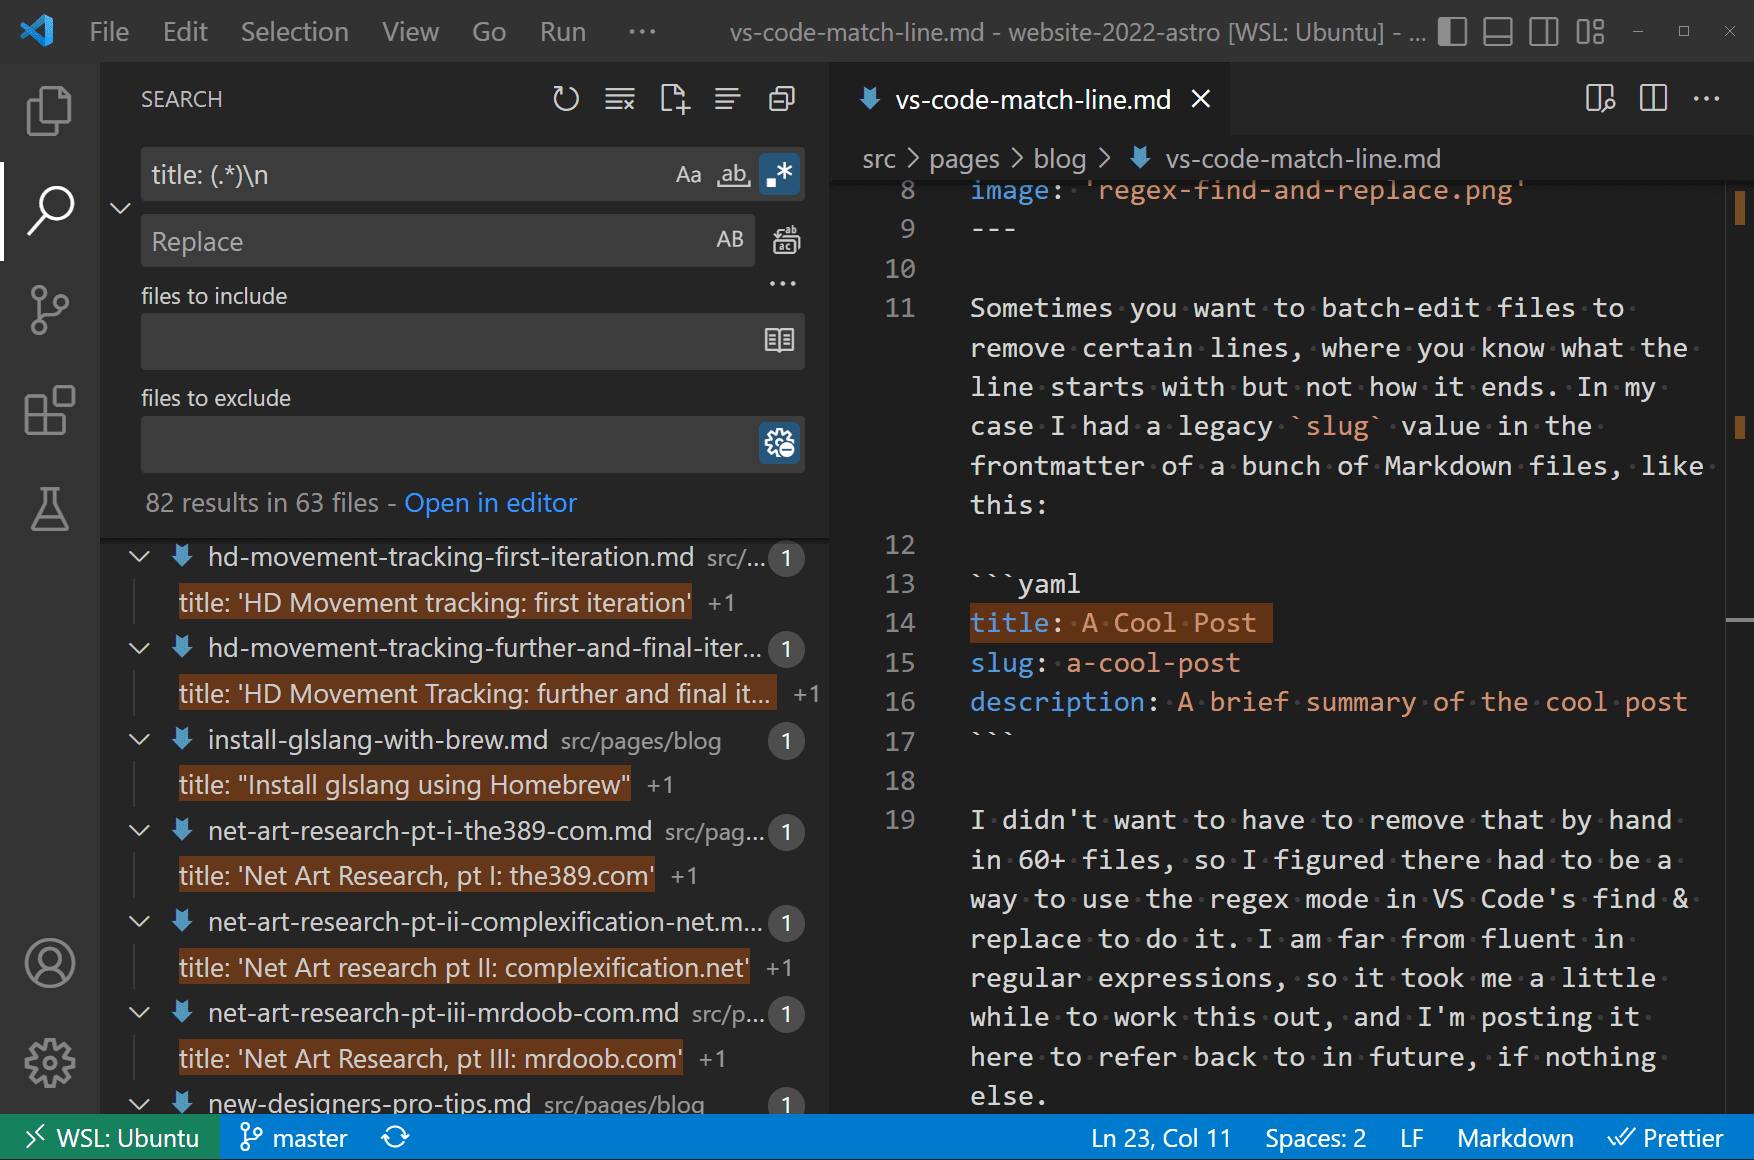 A screenshot of the VS Code search panel using the regex